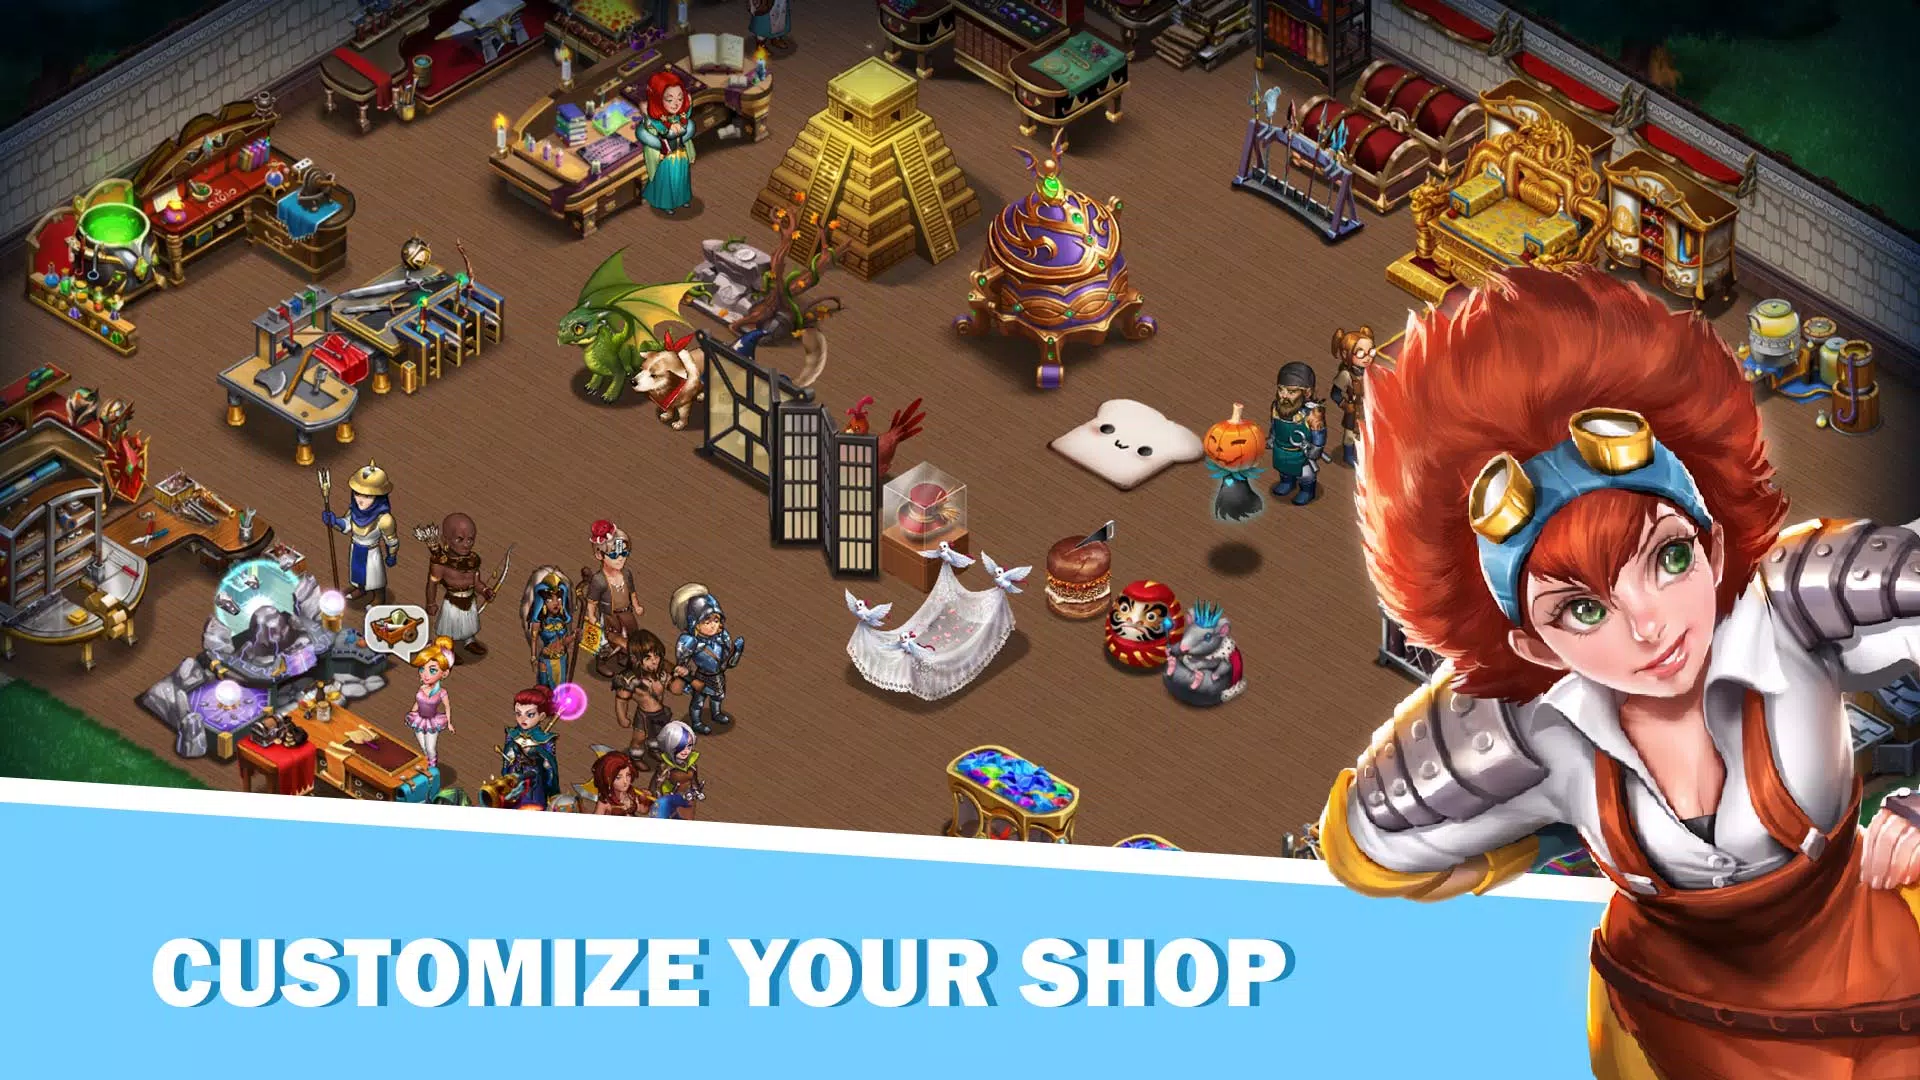 Tải Xuống Apk Shop Heroes Cho Android